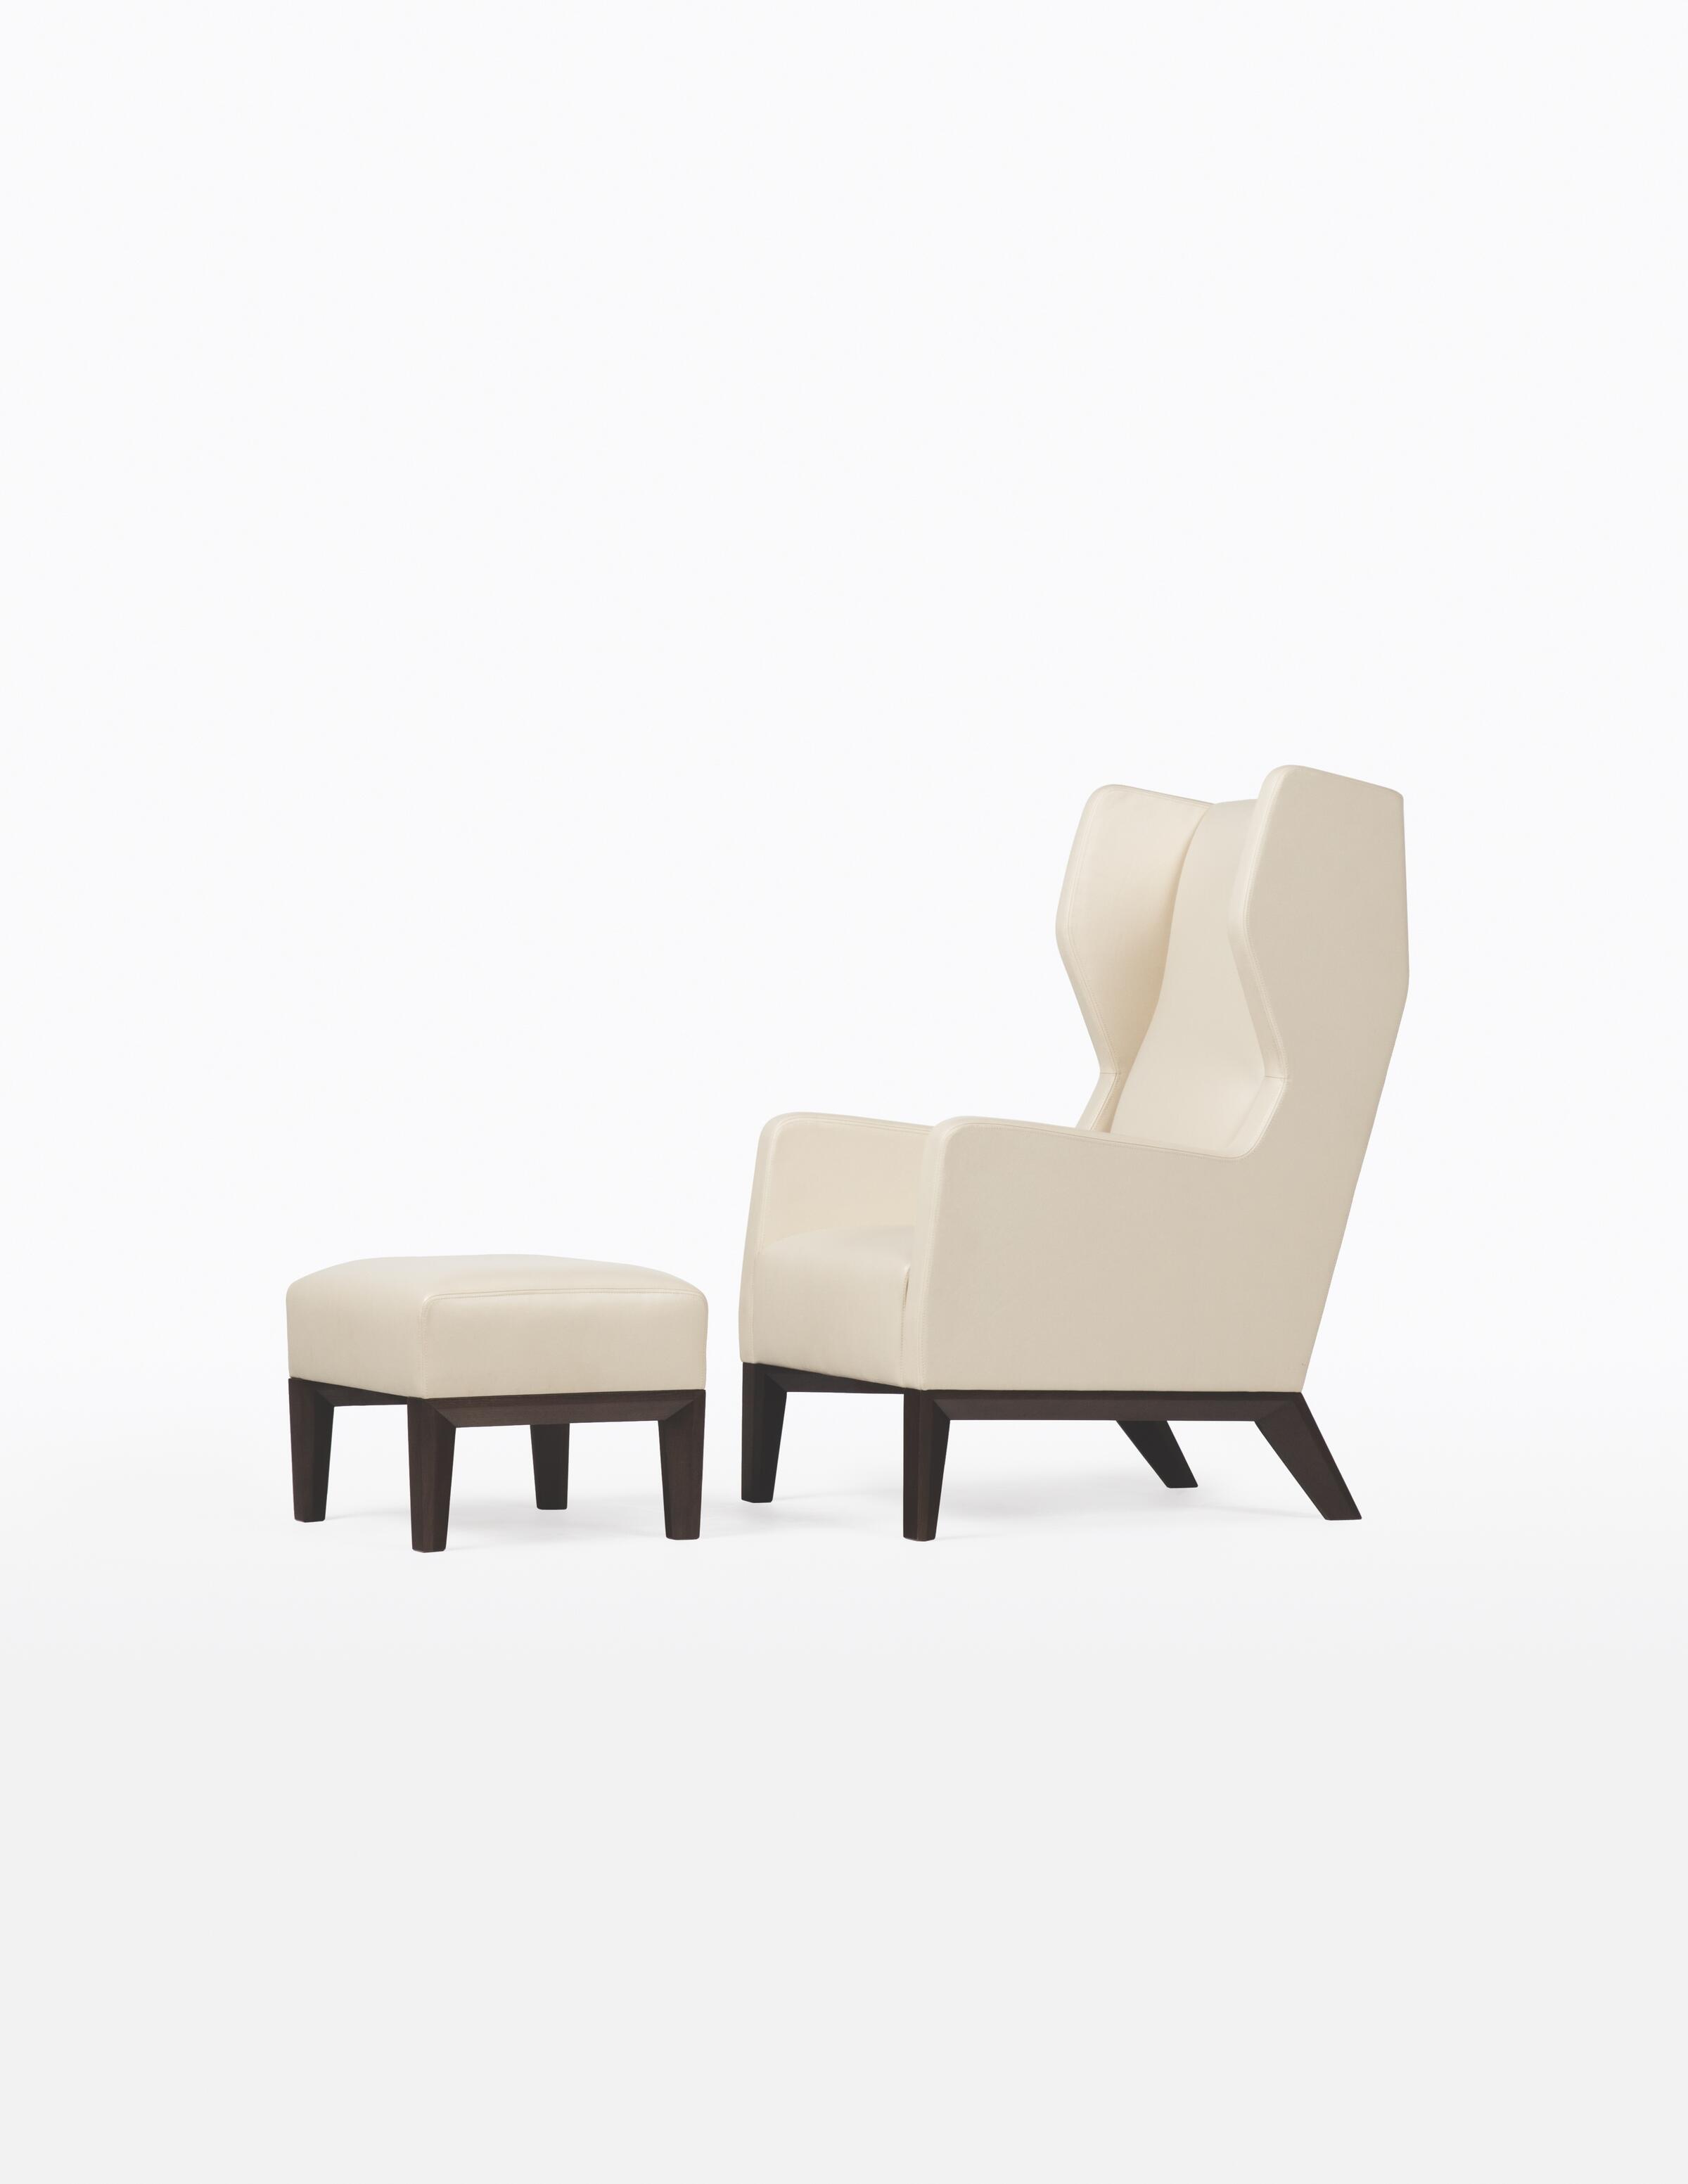 Darder Wingback Chair